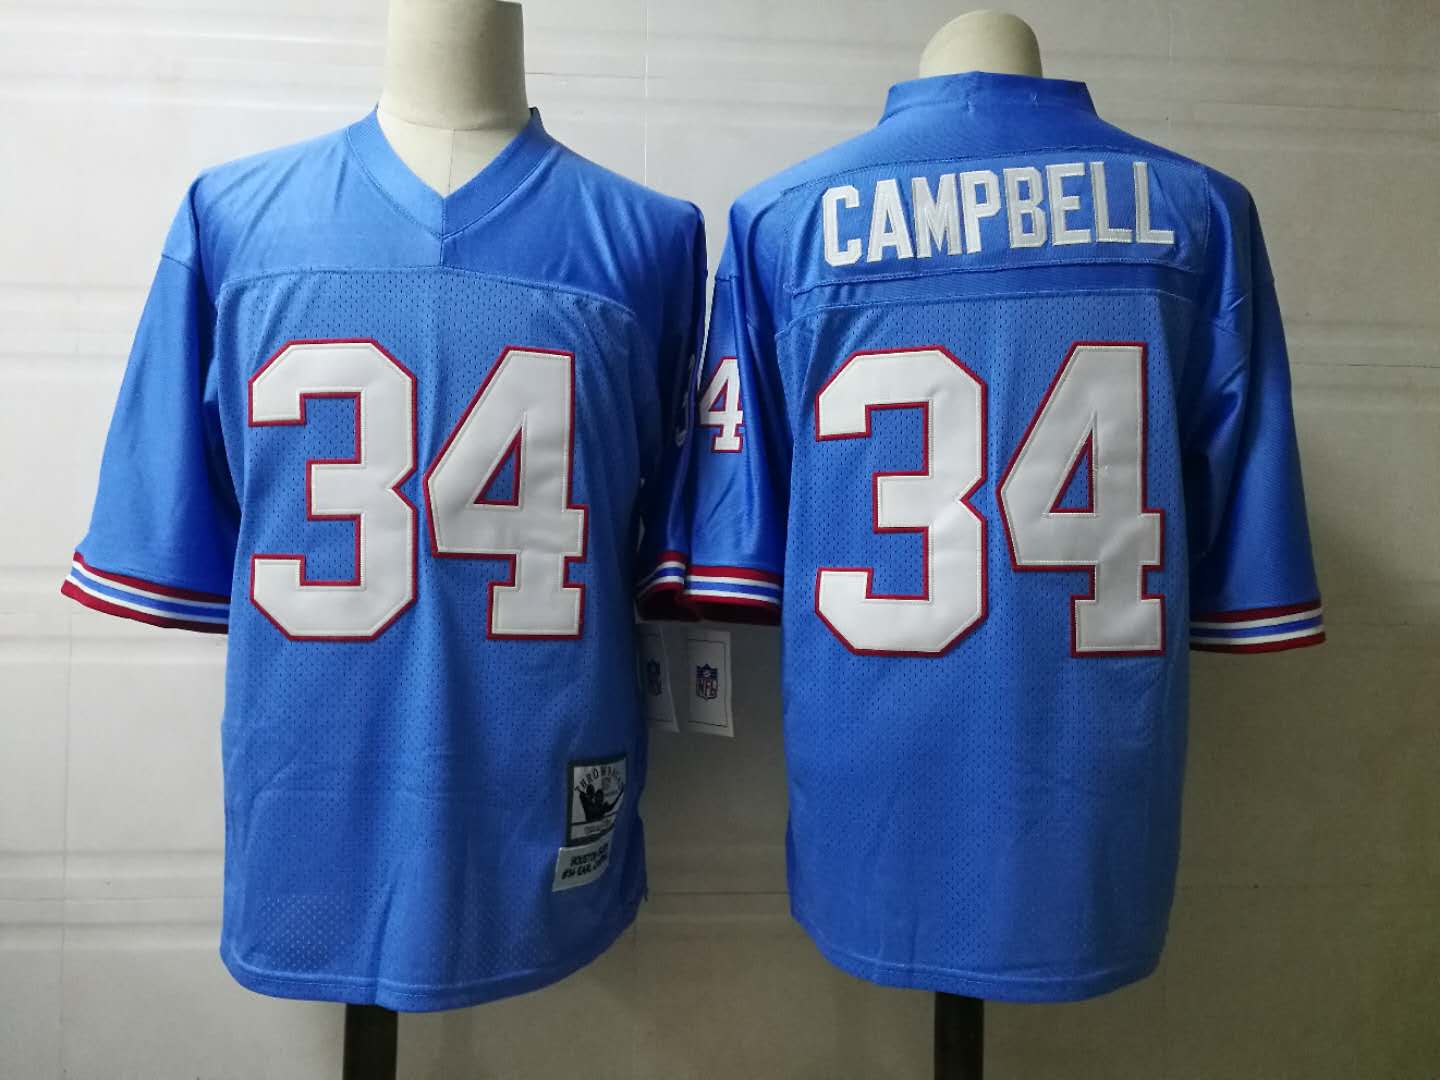 Men's Houston Oilers #34 Earl Campbell Light Blue Throwback Jersey